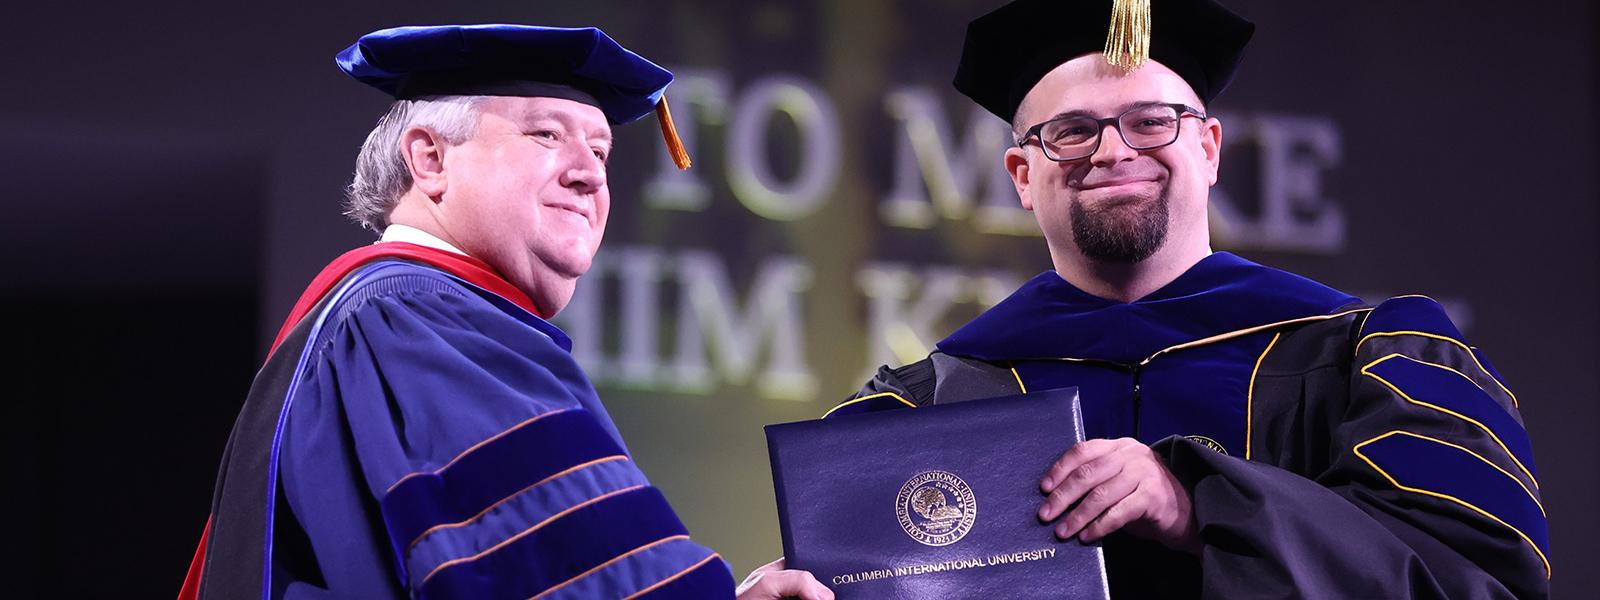 Dr. Josh Waltman (right) receives his Ph.D. in Theological Studies from President Dr. Mark A. Smith 